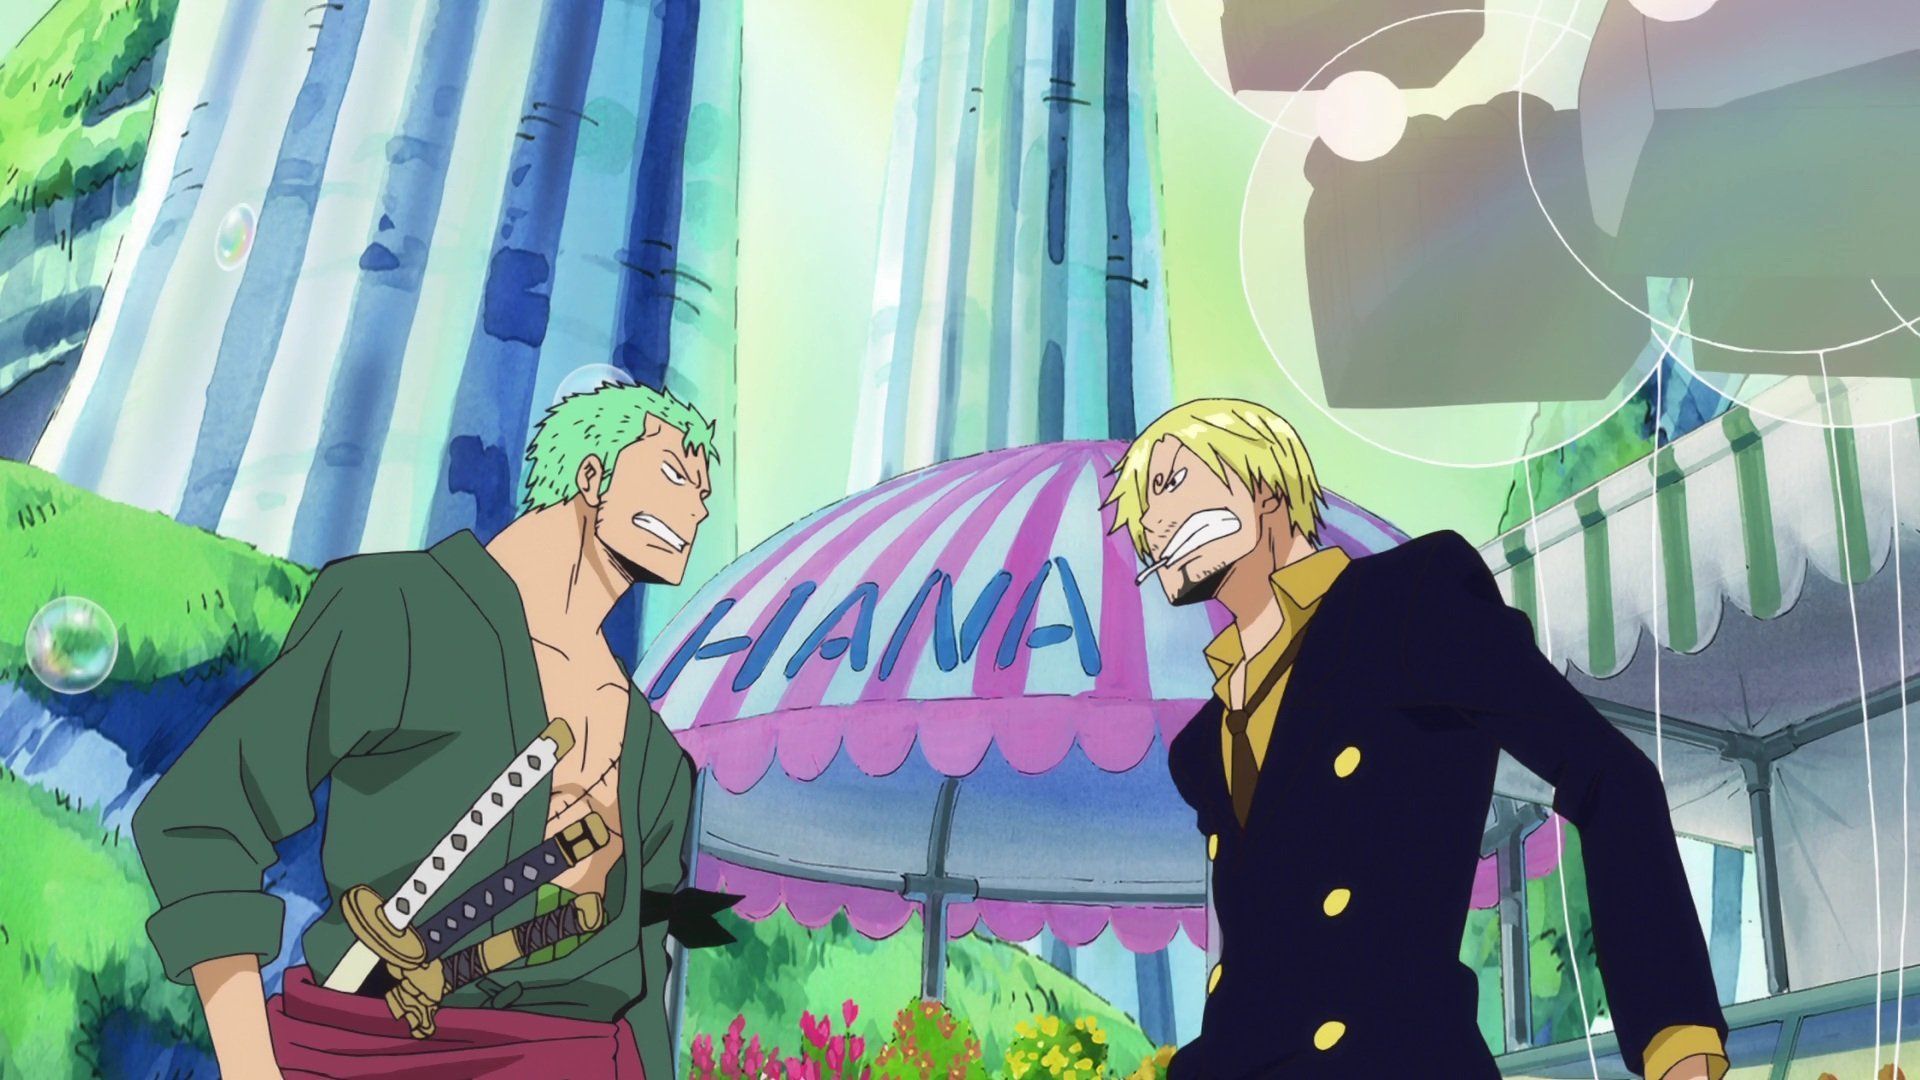 Zoro and Sanji seen arguing in the anime (Image via Toei Animation)